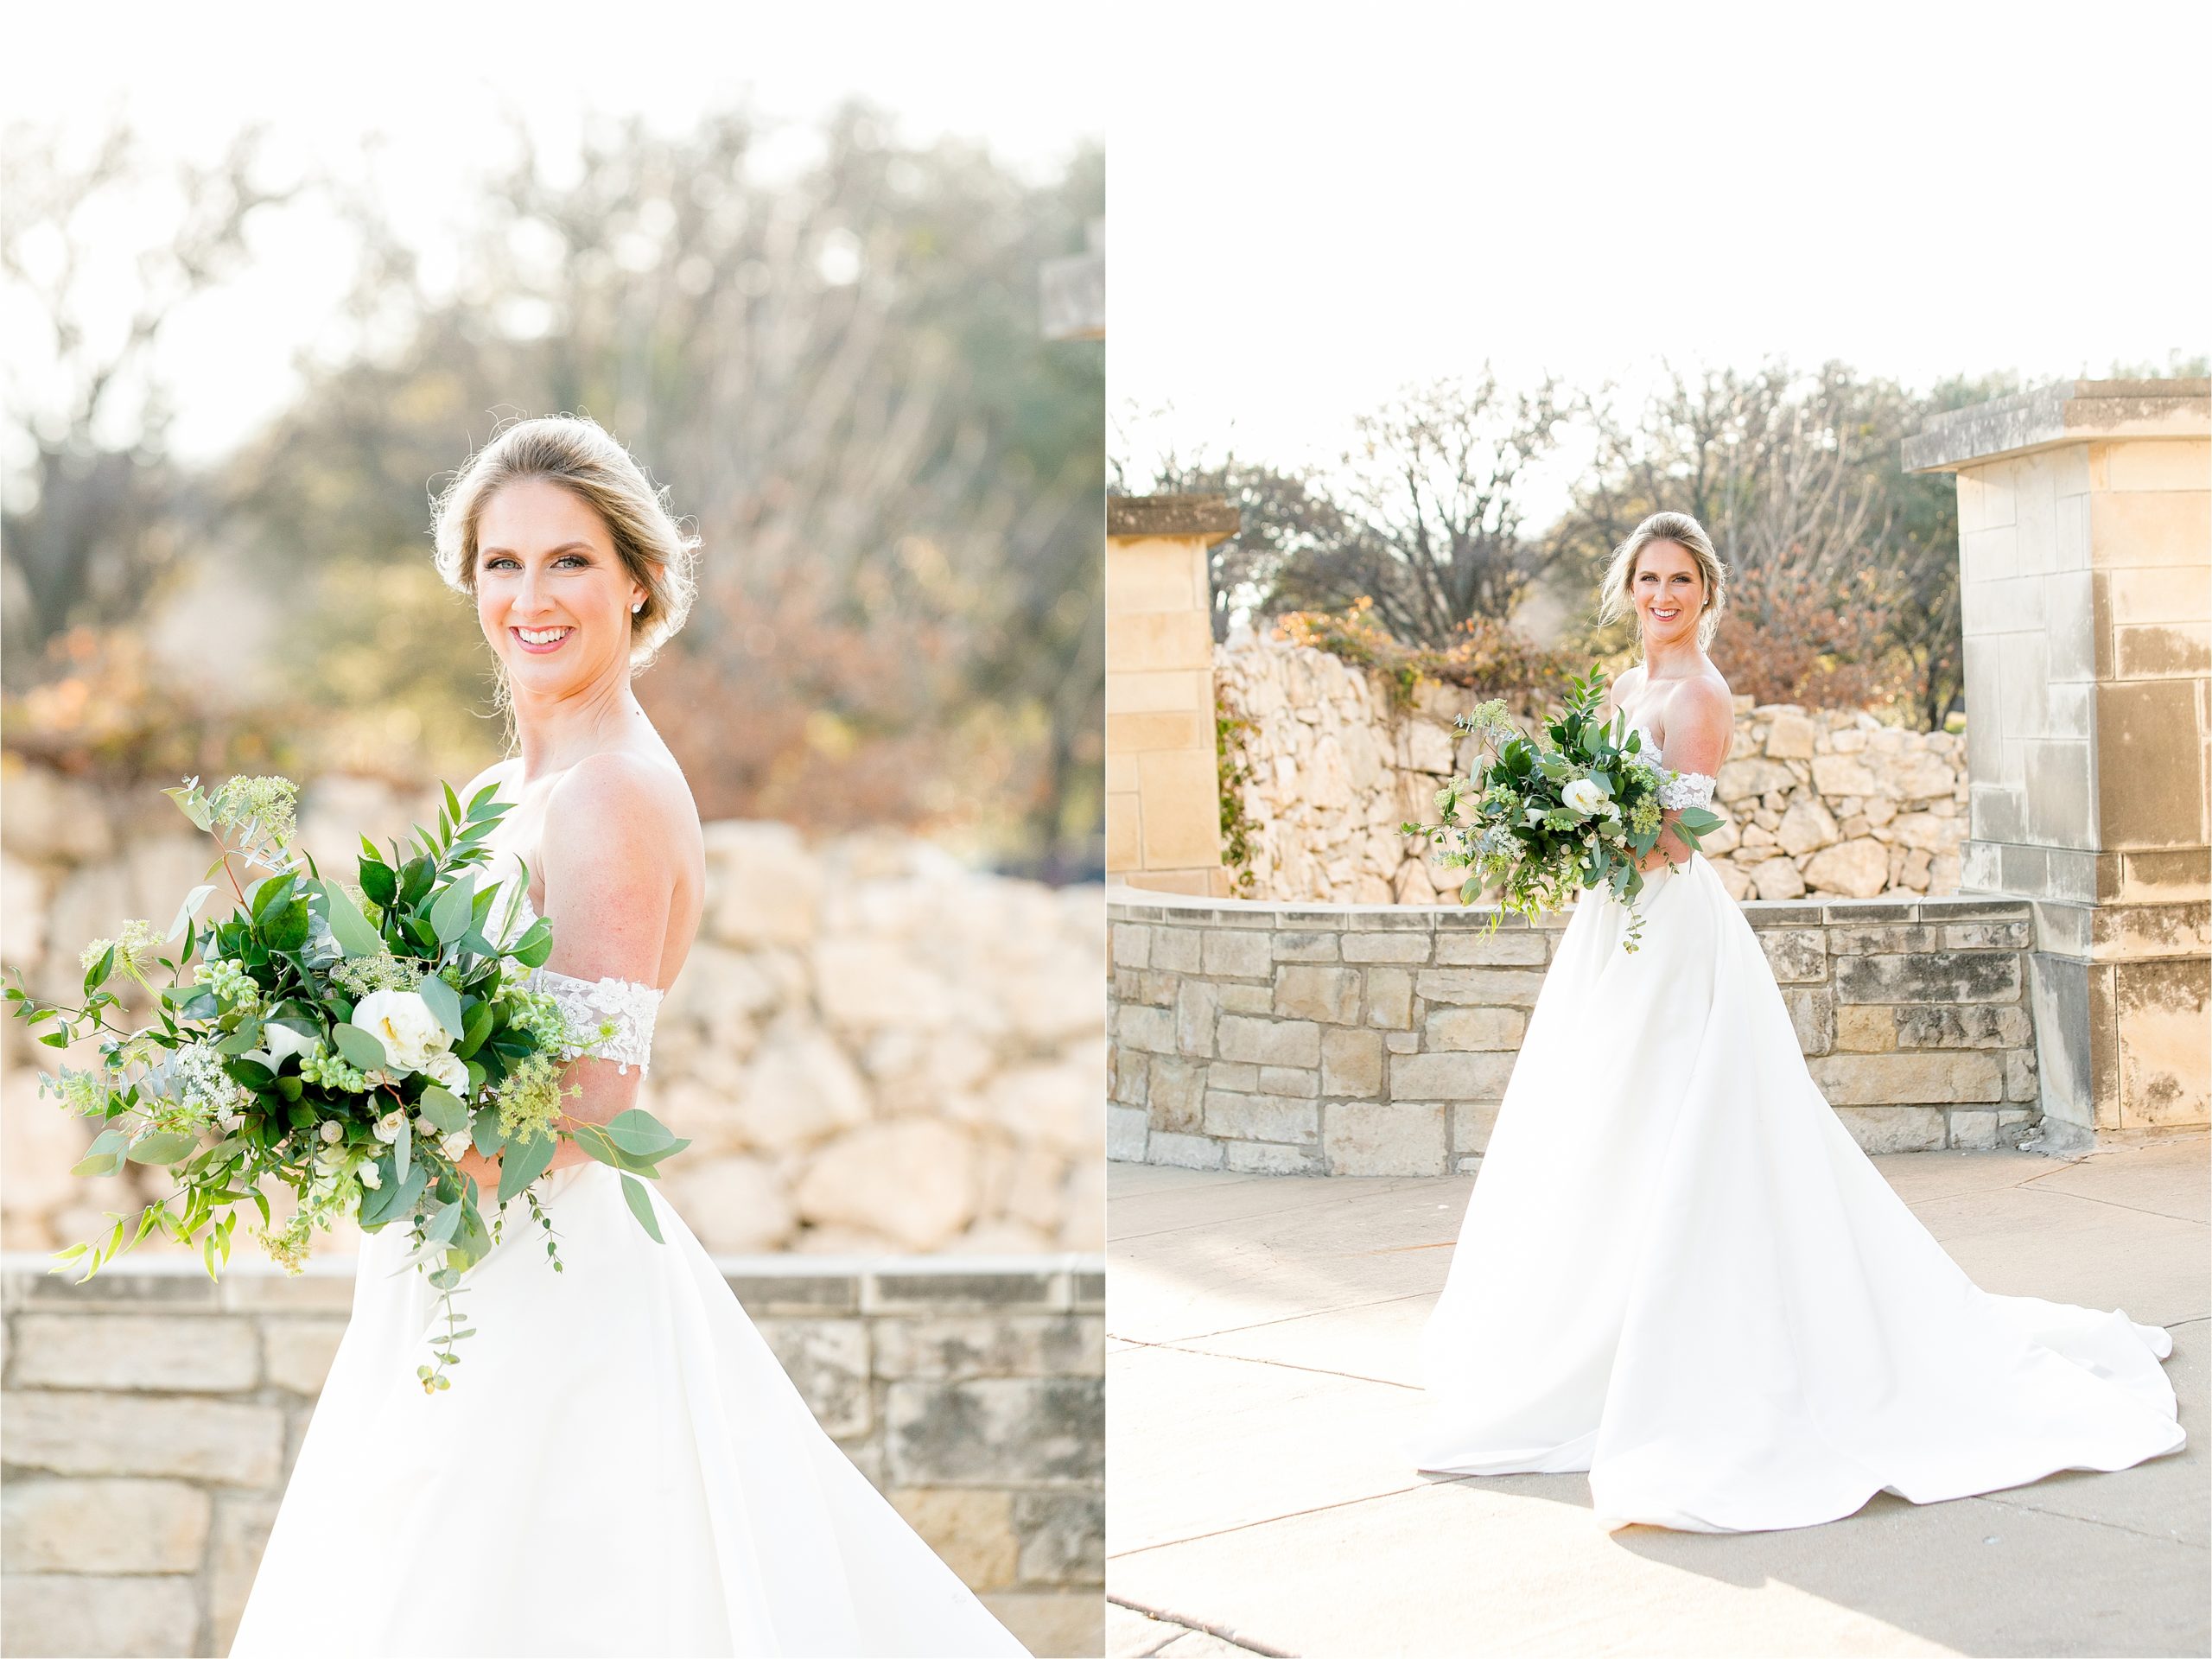 A bride to be cradles her greenery filled wedding bouquet in front of stone wall at adriatica village with Hill Country Wedding PHotographer Jillian Hogan 